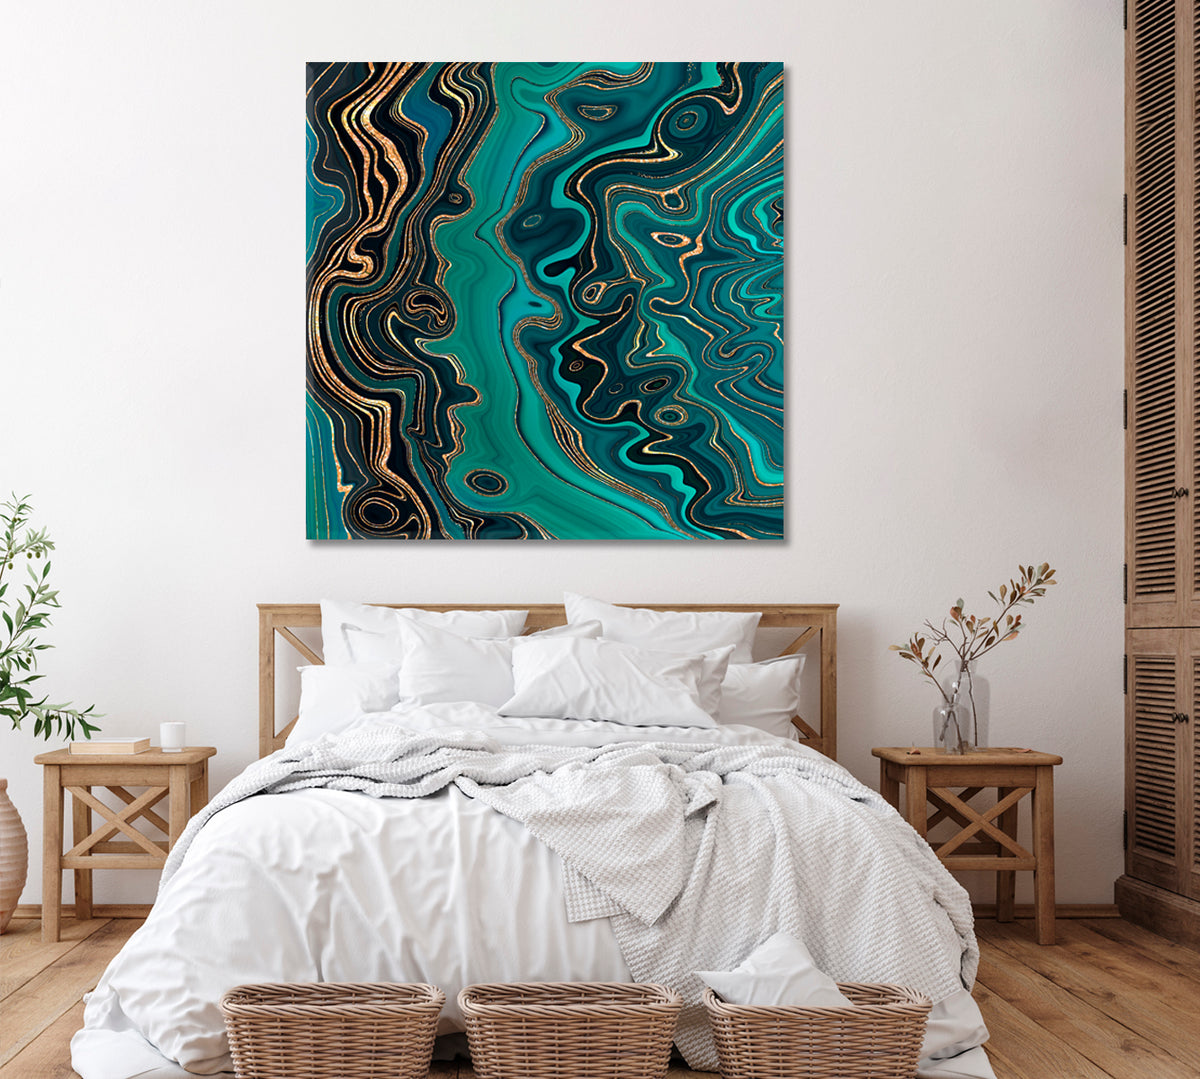 Abstract Green Wavy Marble with Gold Veins Canvas Print ArtLexy 1 Panel 12"x12" inches 